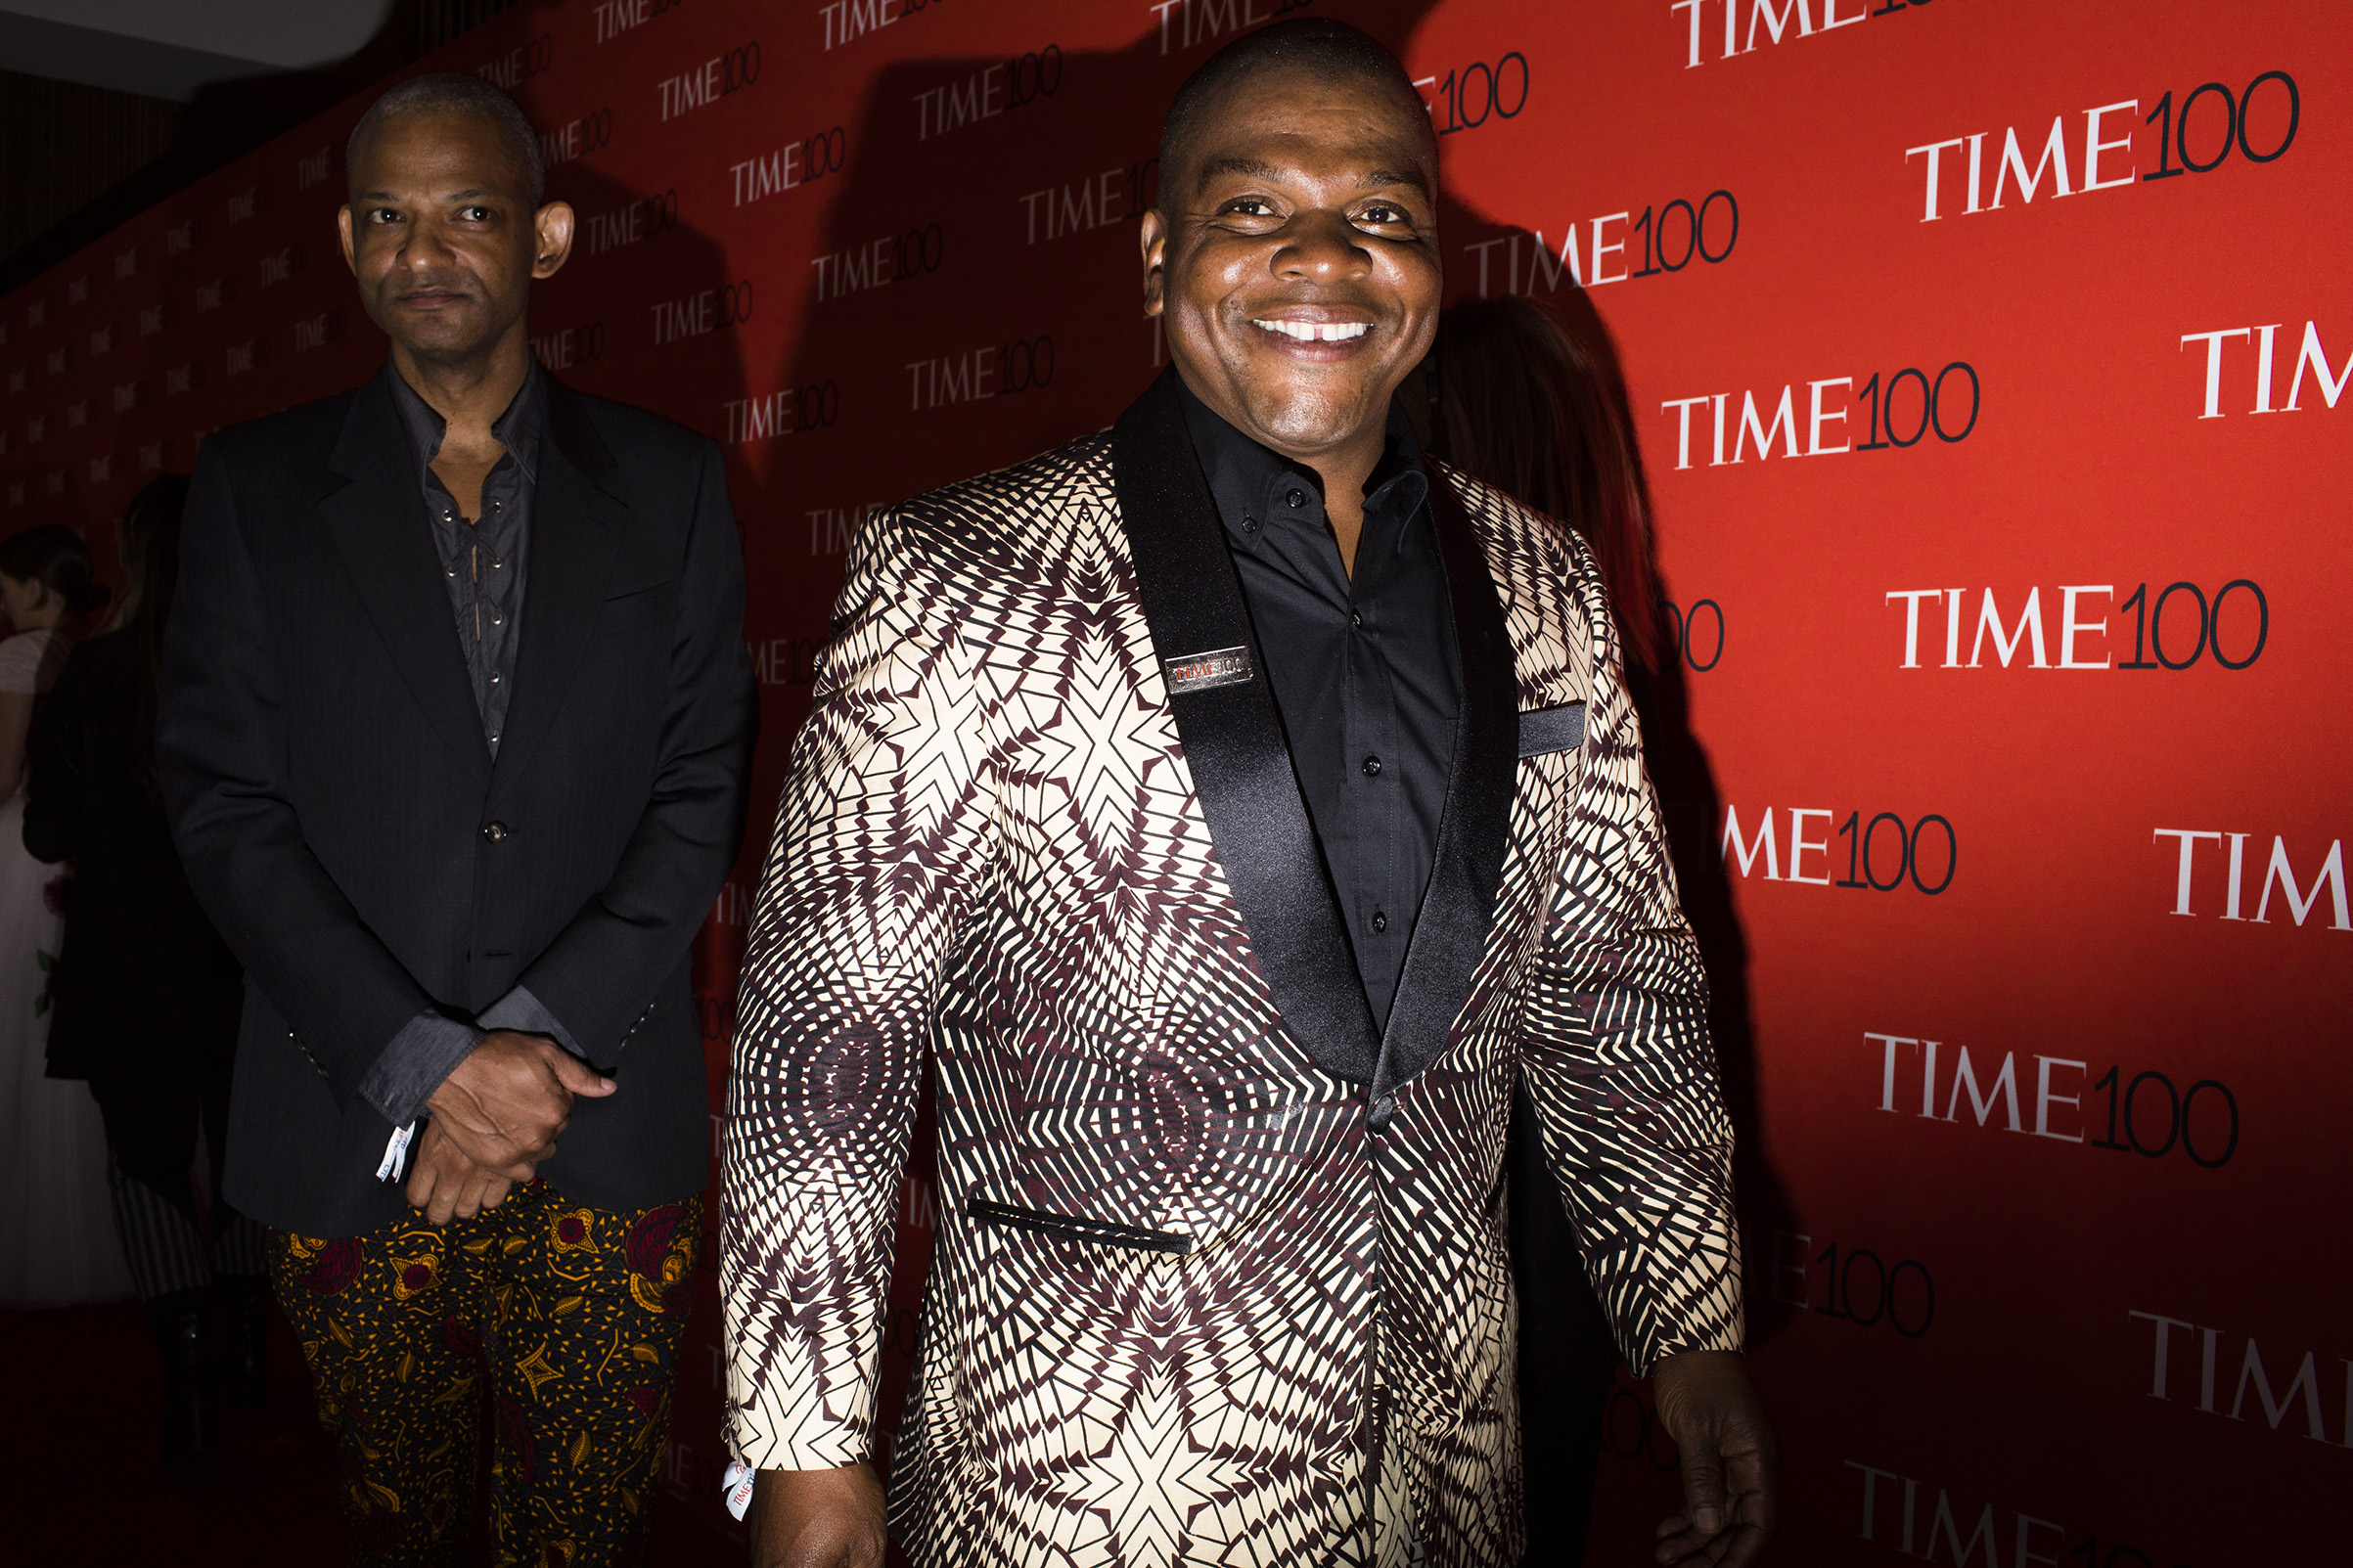 Portrait painter Kehinde Wiley at the Time 100 Gala at Jazz at Lincoln Center on April 24, 2018 in New York City. (Landon Nordeman for TIME)